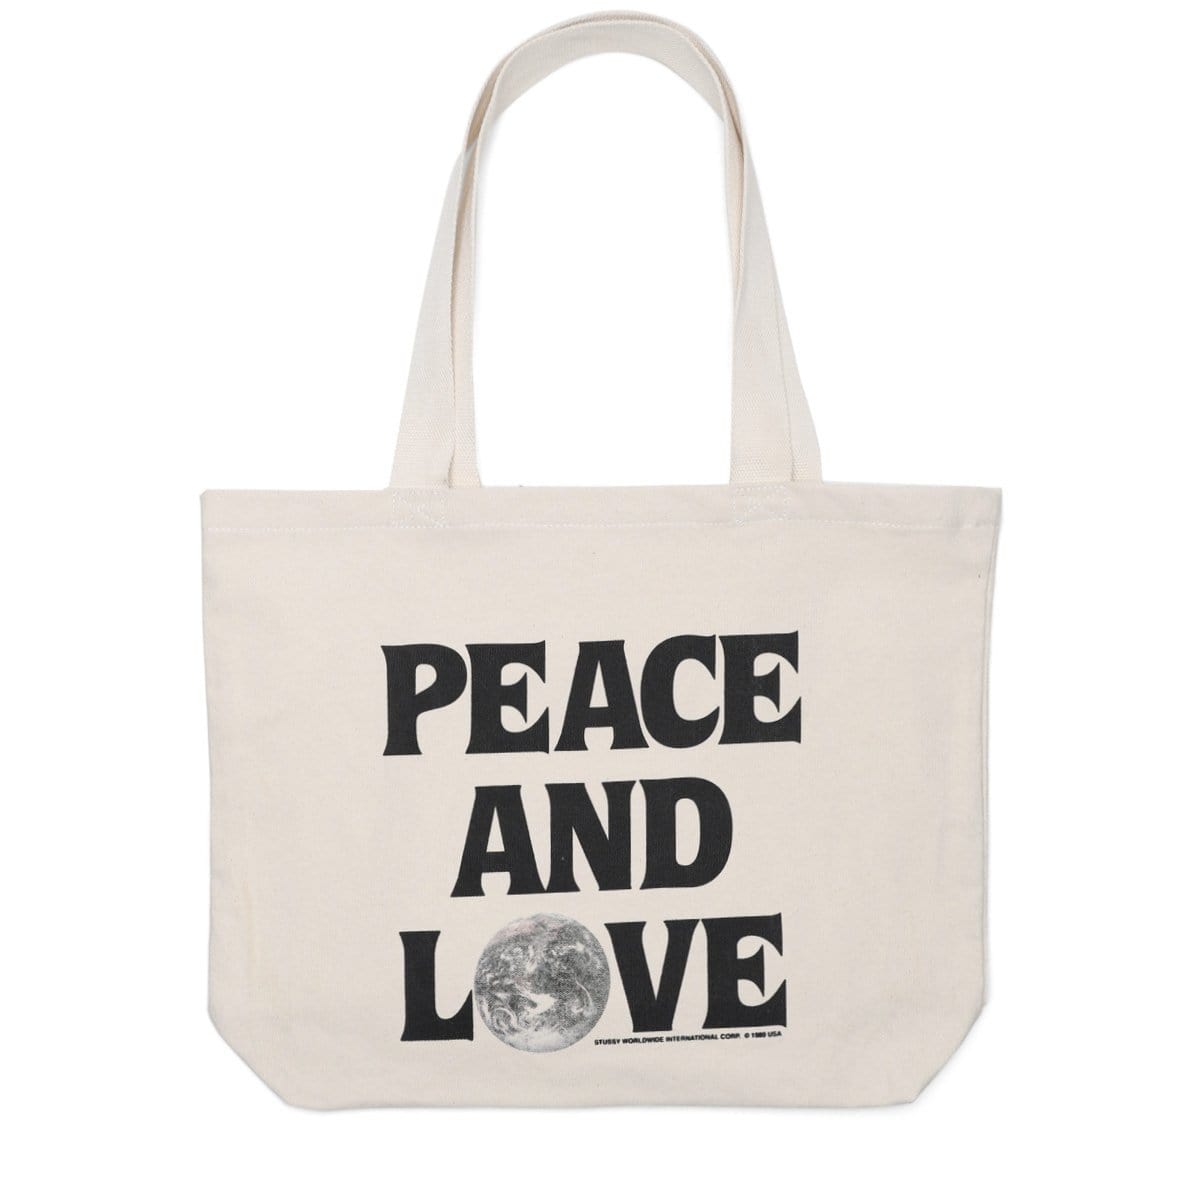 Stüssy Bags & Accessories NATURAL / O/S PEACE AND LOVE CANVAS TOTE BAG